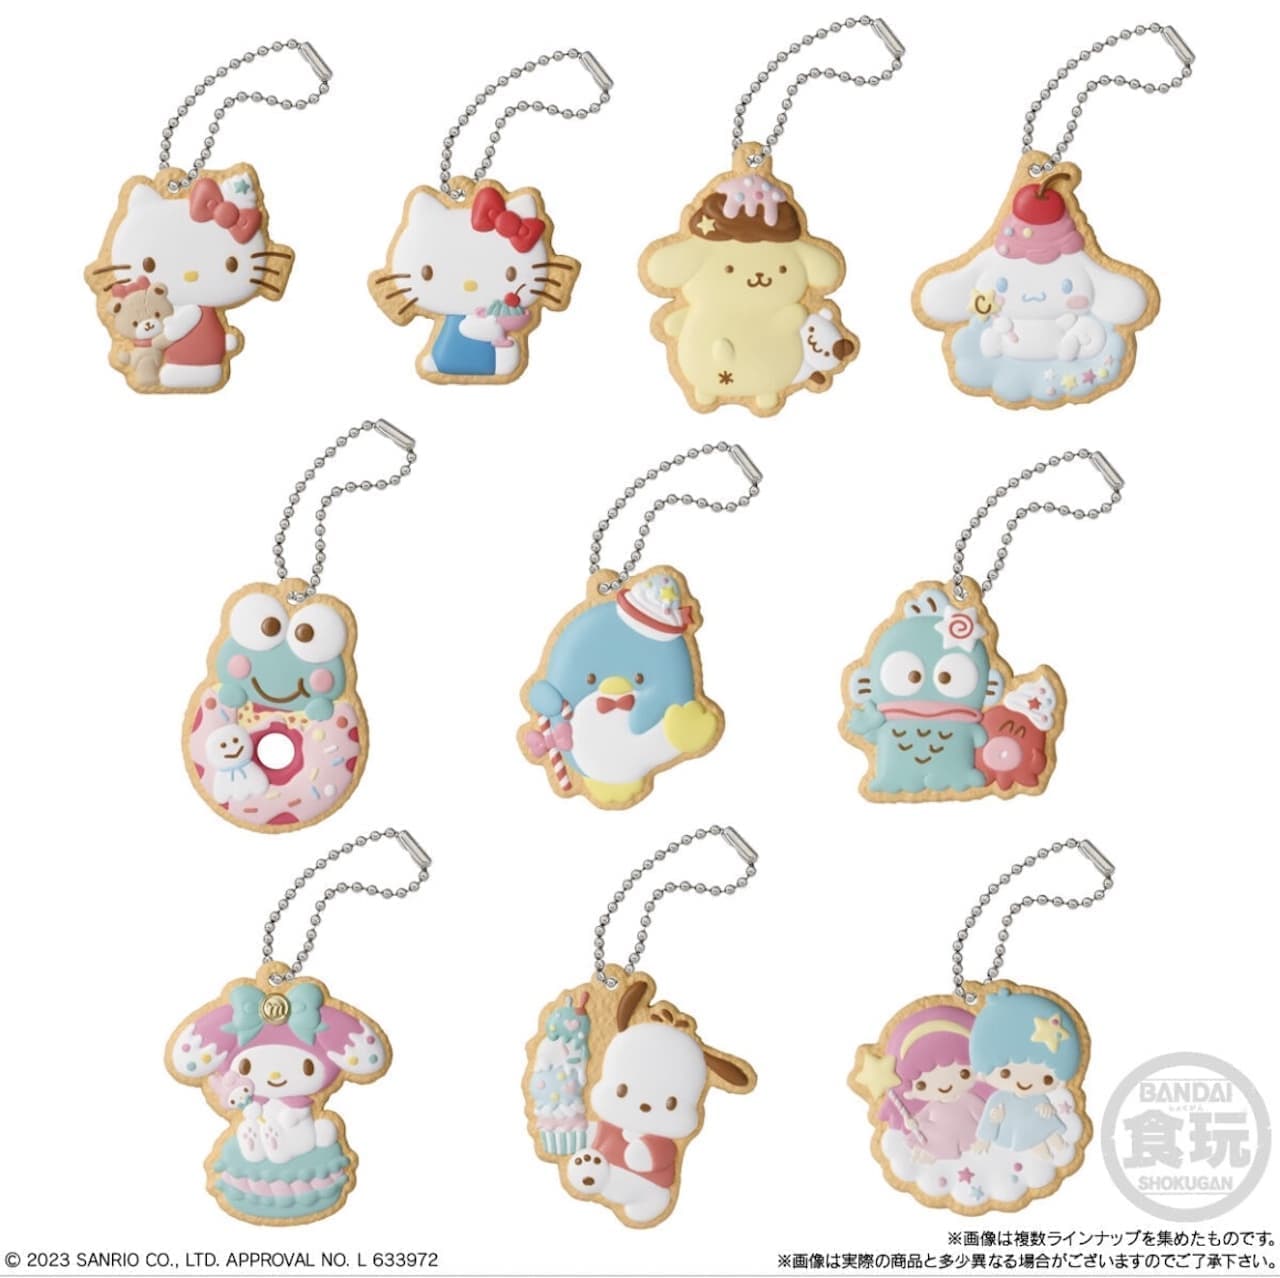 Sanrio Charm Collection "SANRIO CHARACTERS COOKIE CHARMCOT